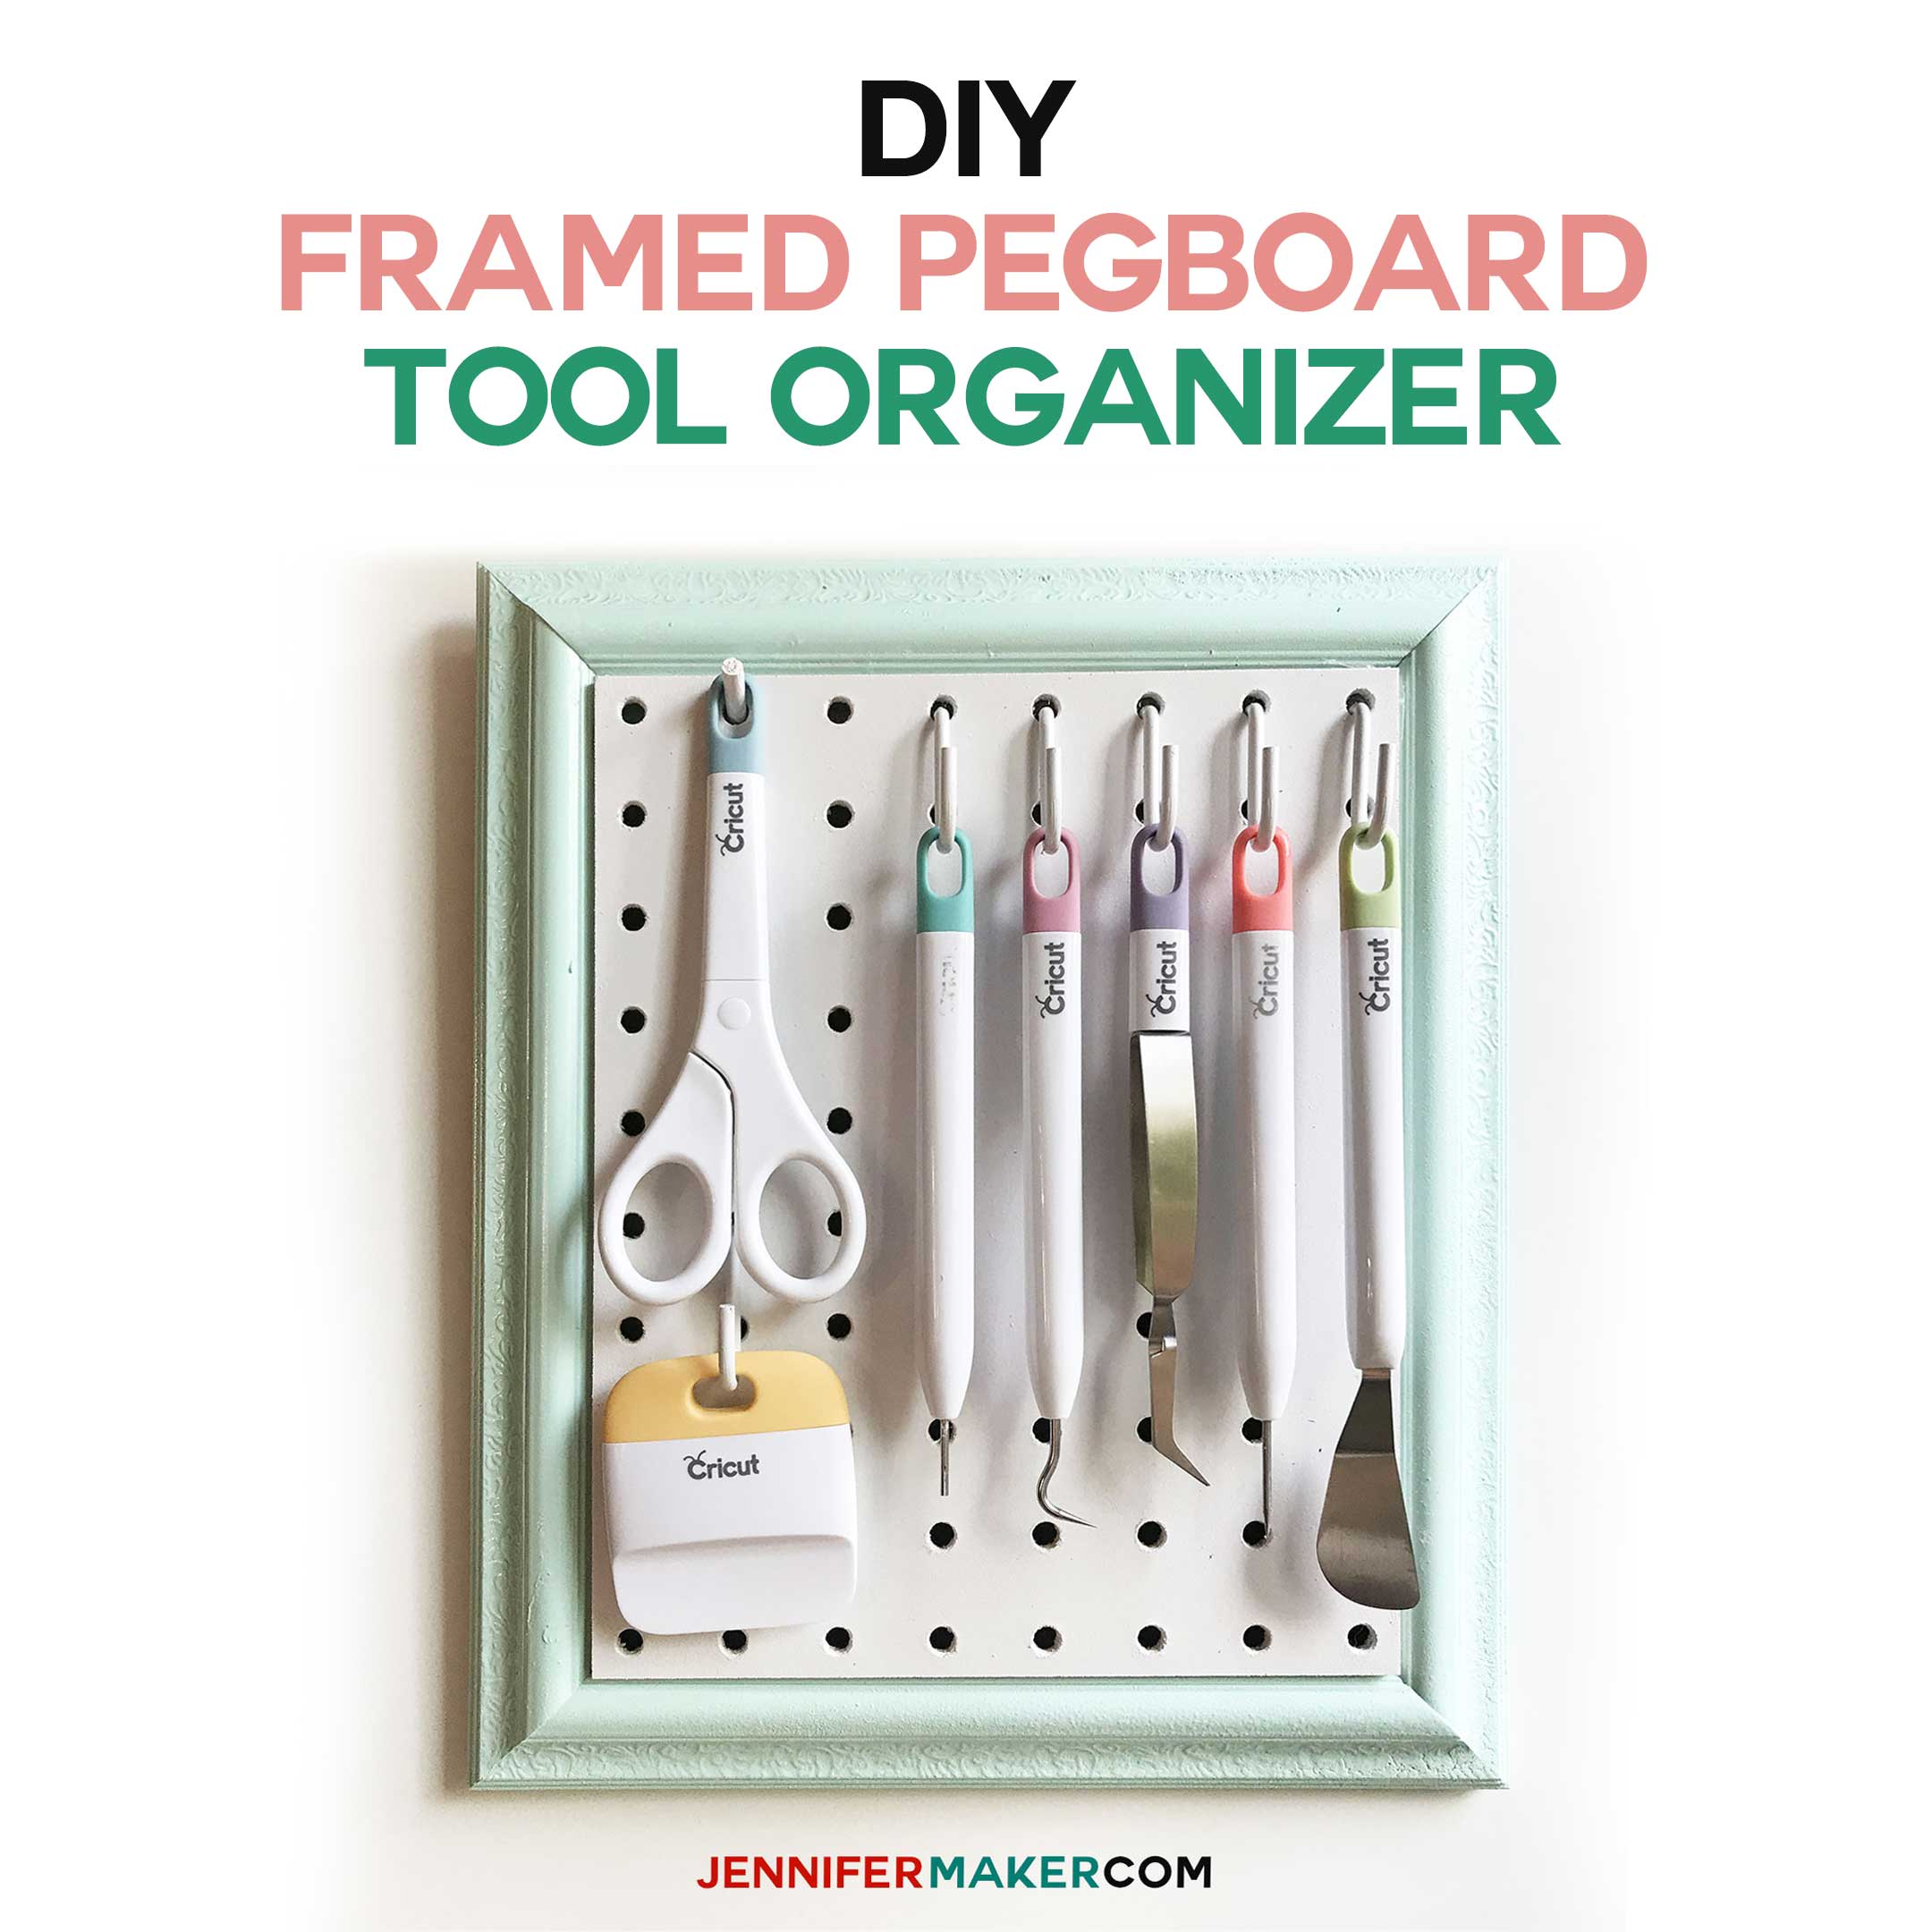 DIY CRICUT TOOL ORGANIZER - Decorate with Tip and More